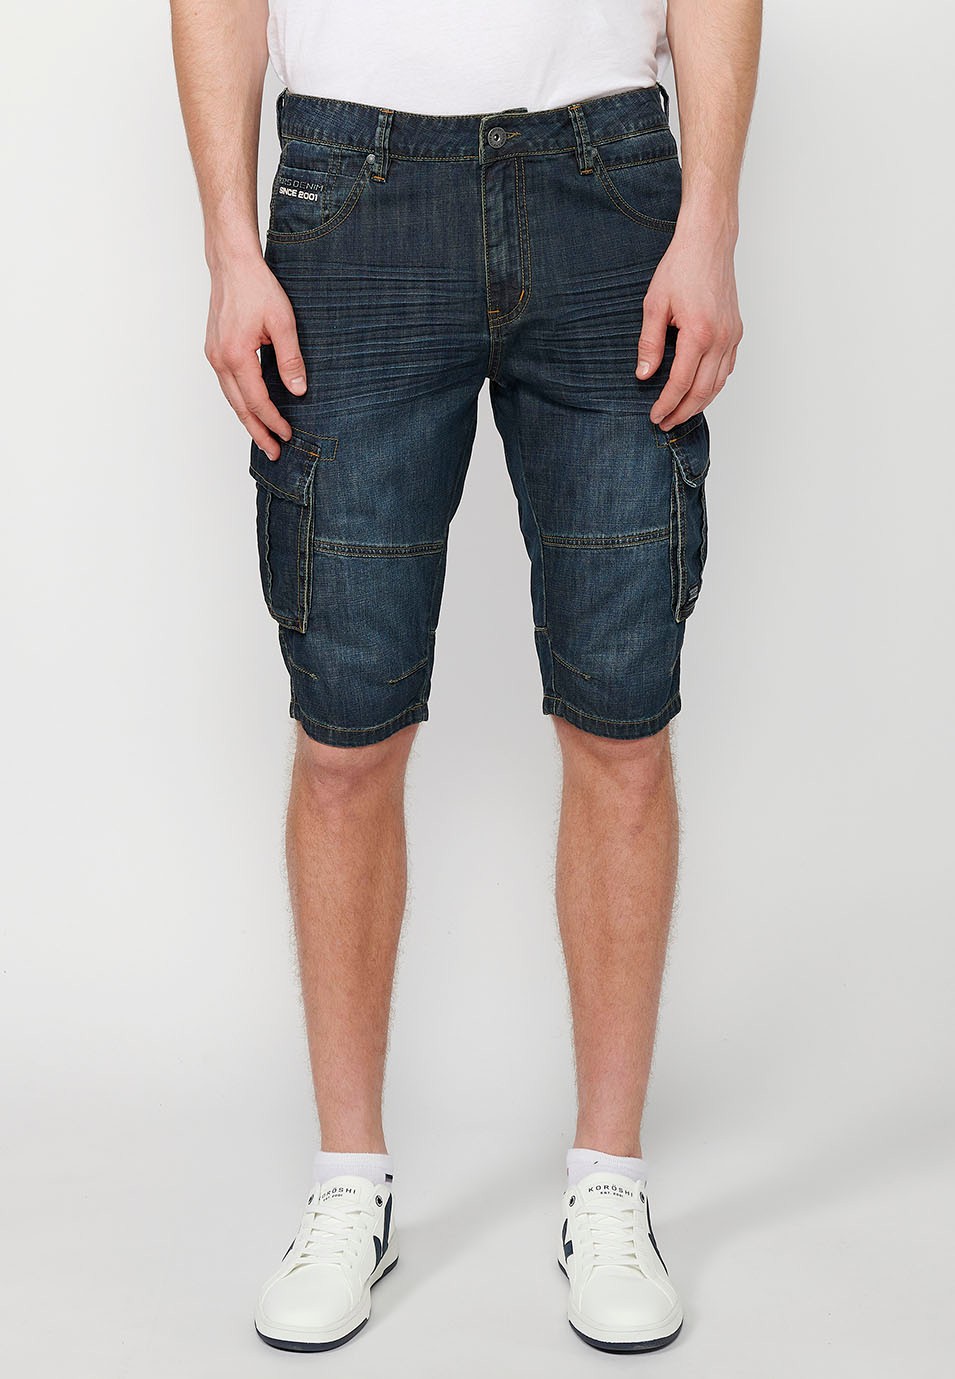 Cotton Pirate Denim Bermuda Shorts with Side Pockets and Front Closure with Zipper and Button in Blue for Men 1